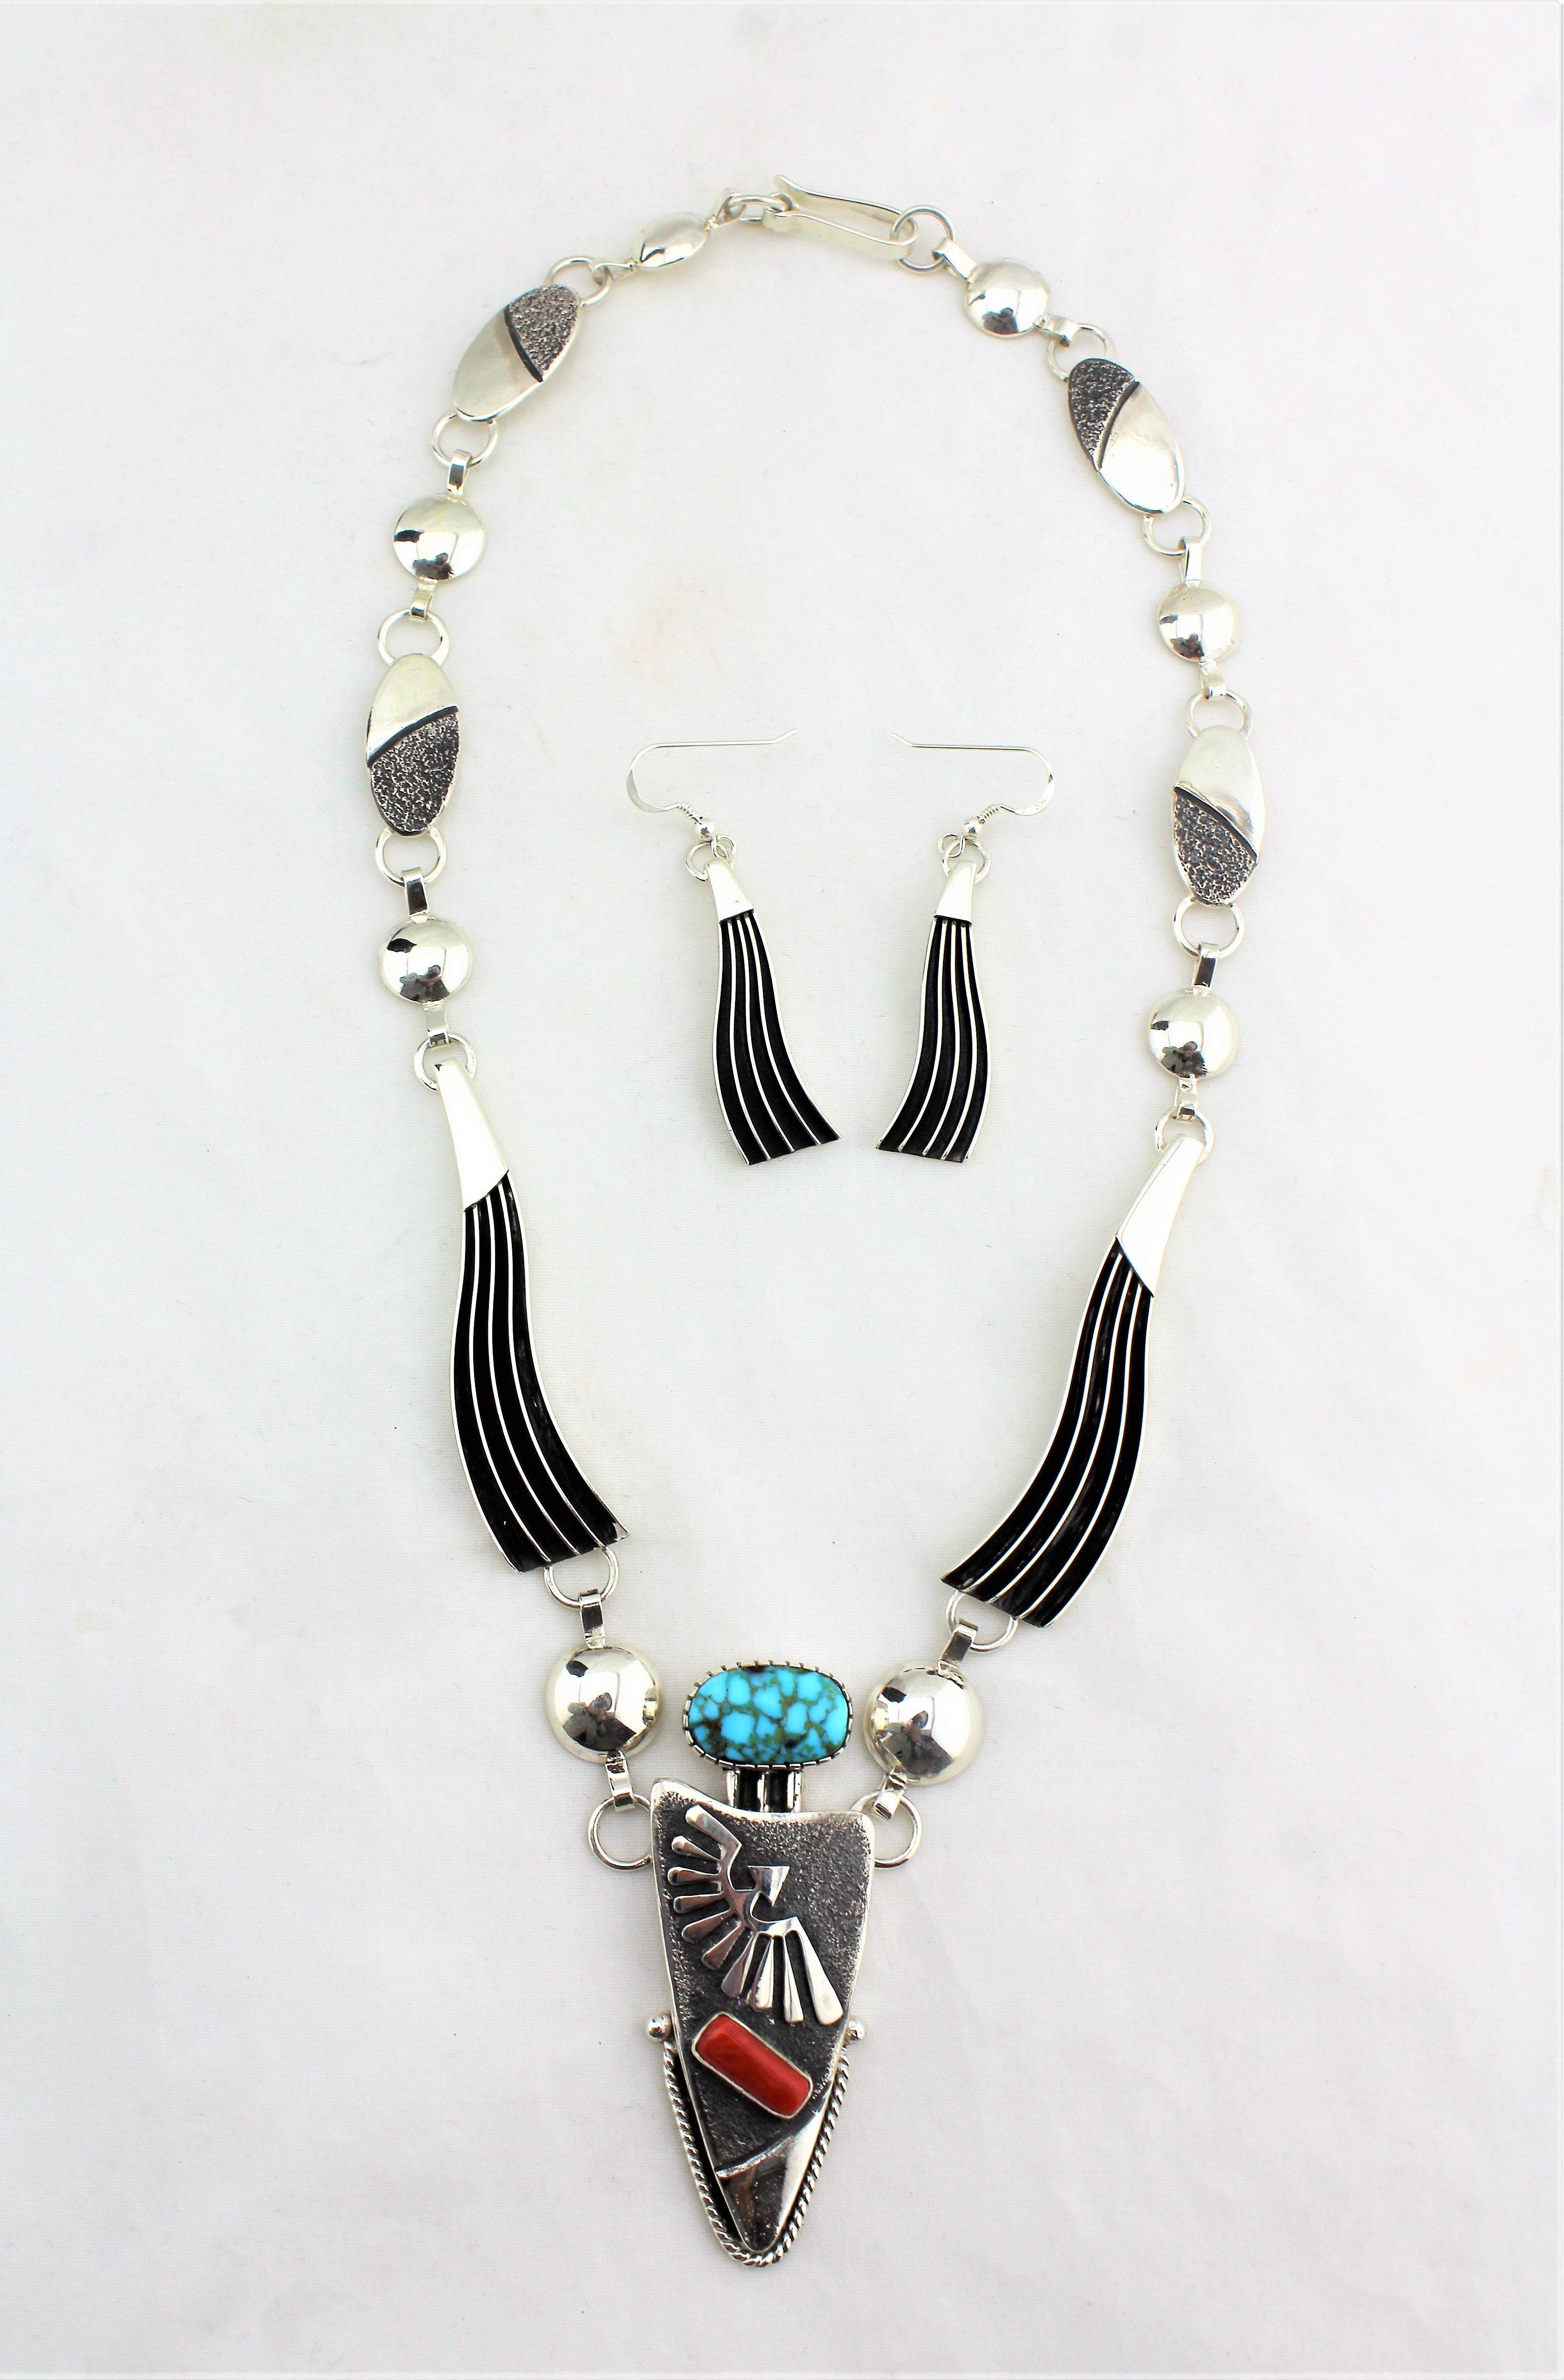 Jack Tom Sterling Silver Tufa Cast Necklace and Earrings Set